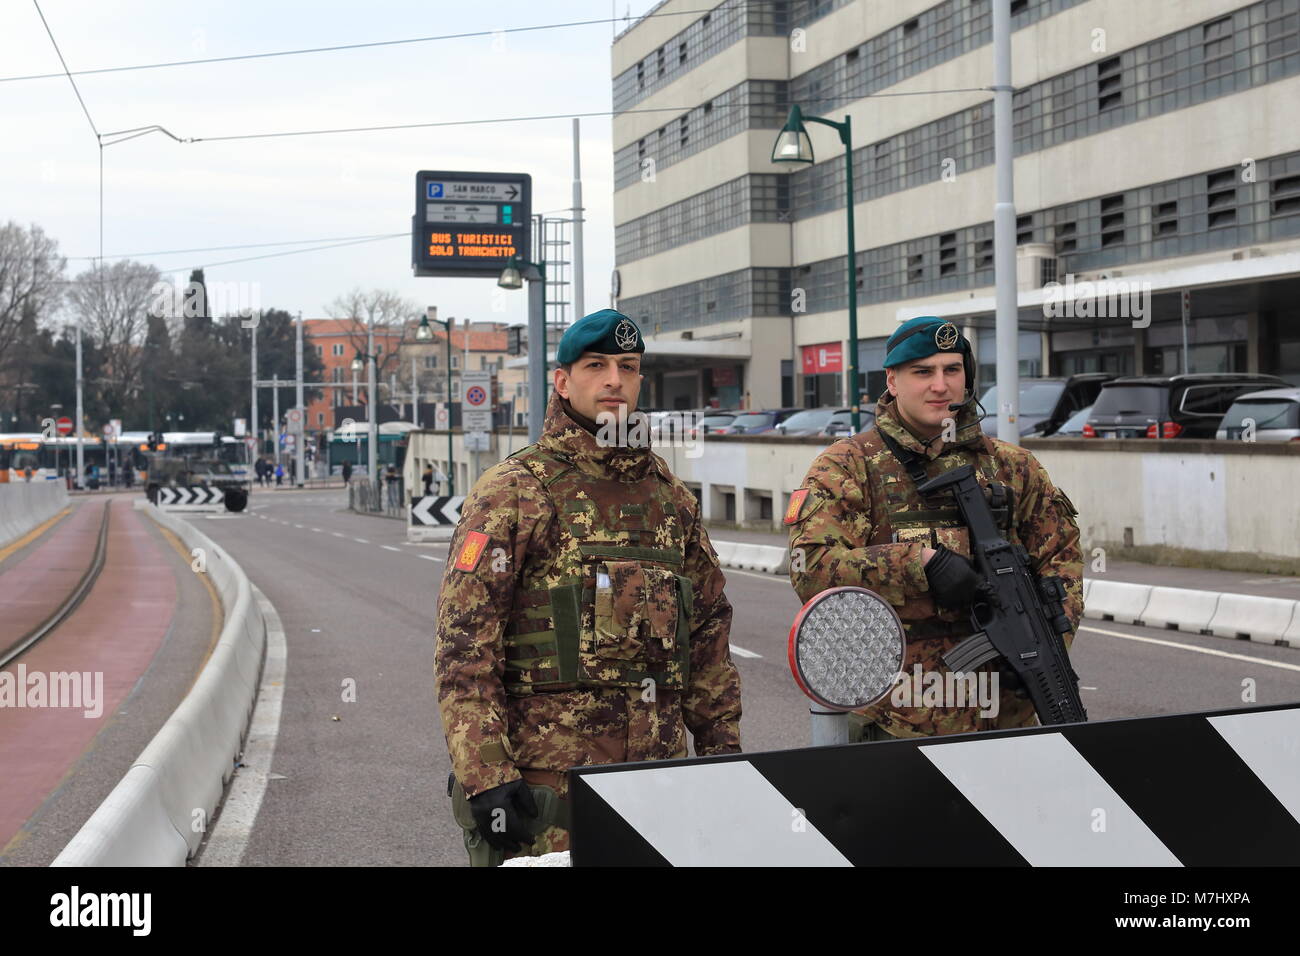 Venice, Italy. 10th, Mar 2018.  The soldiers at control barrier in Venice. In 28th August 2017, were built on the gate of Venice 'Piazzale Roma', the anti-terror barrier when started in the Venice Film Festival. After eight months the impotent jersey barriers in concrete are still there. The installation continuous to check the viability of traffic flow, and pedestrian. The barriers extending over Ponte Della Libertˆ to Piazzale Roma ahead, are designed to block any vehicular attack, an armored car was control the traffic. Credit: ALEJANDRO SALA/Alamy Live News Stock Photo